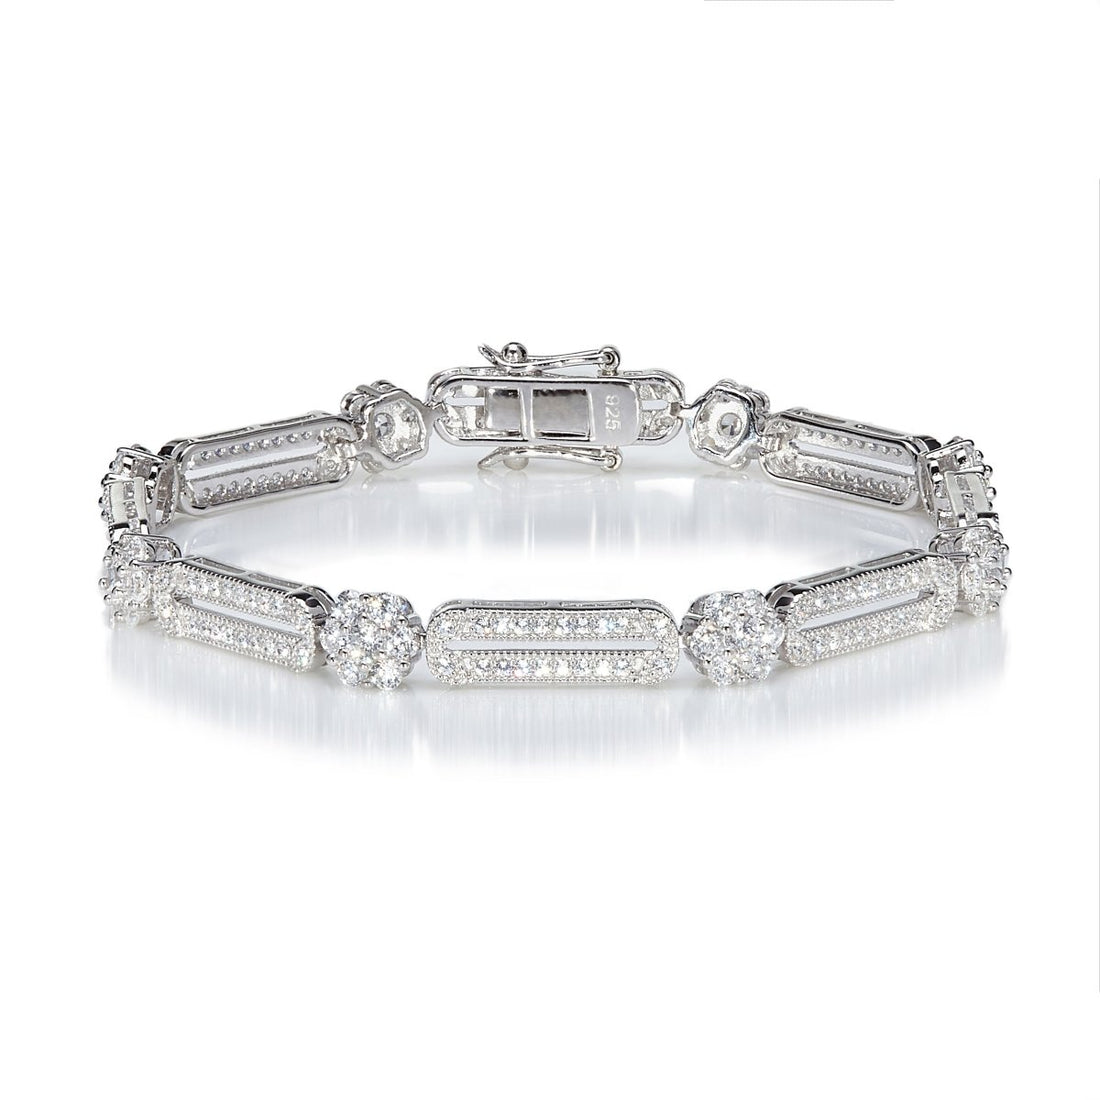 6.35ct Cubic Zirconia Fancy Cluster Bracelet in Rhodium Plated Silver